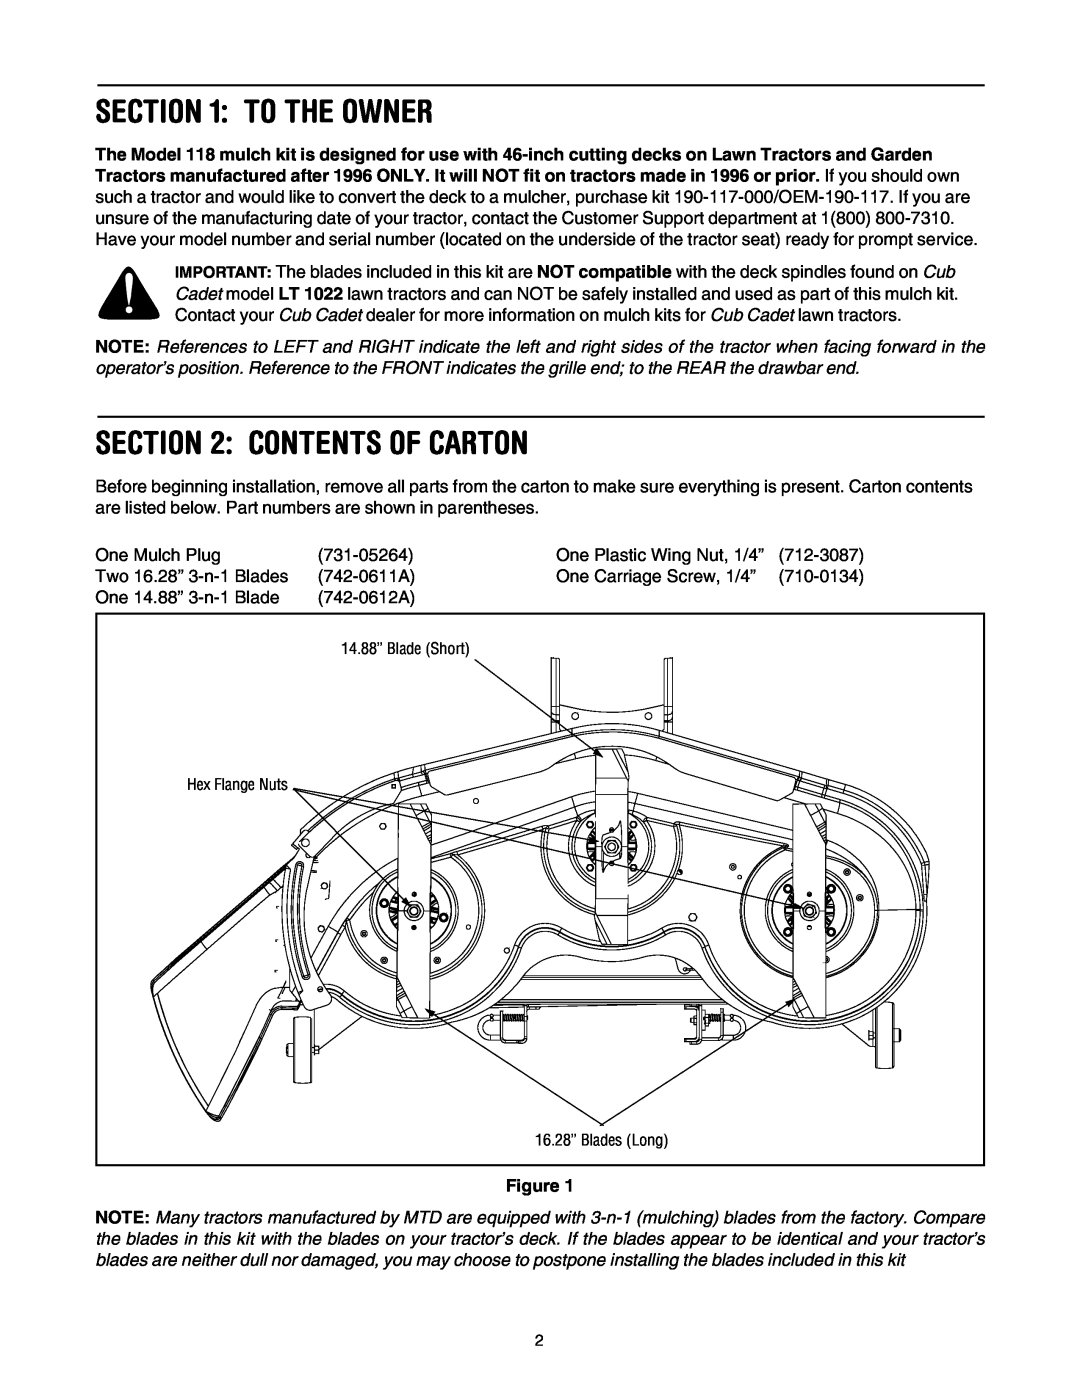 MTD 190-118-000, OEM-190-118, 190-118-100 manual To The Owner, Contents Of Carton 